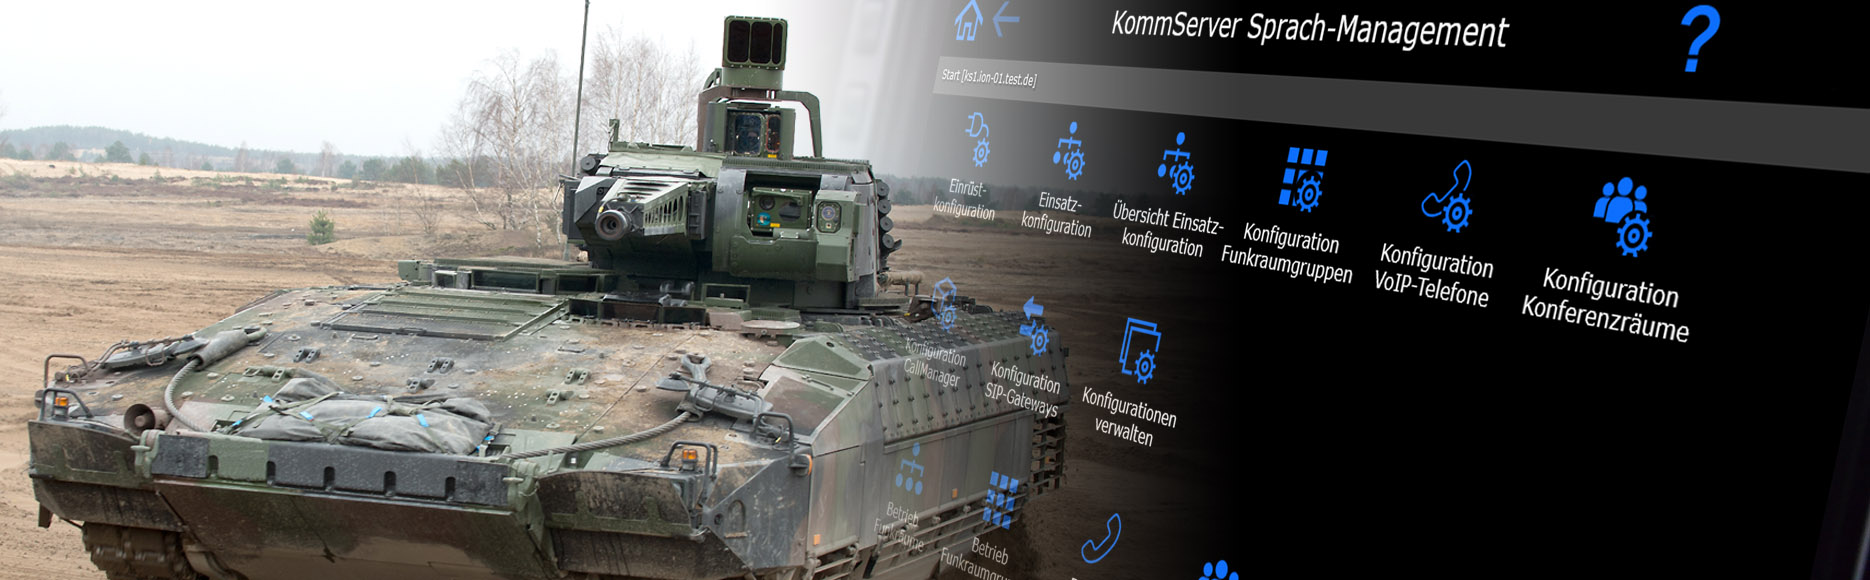 Dismounted soldiers kneel next to the PUMA infantry fighting vehicle and software interface